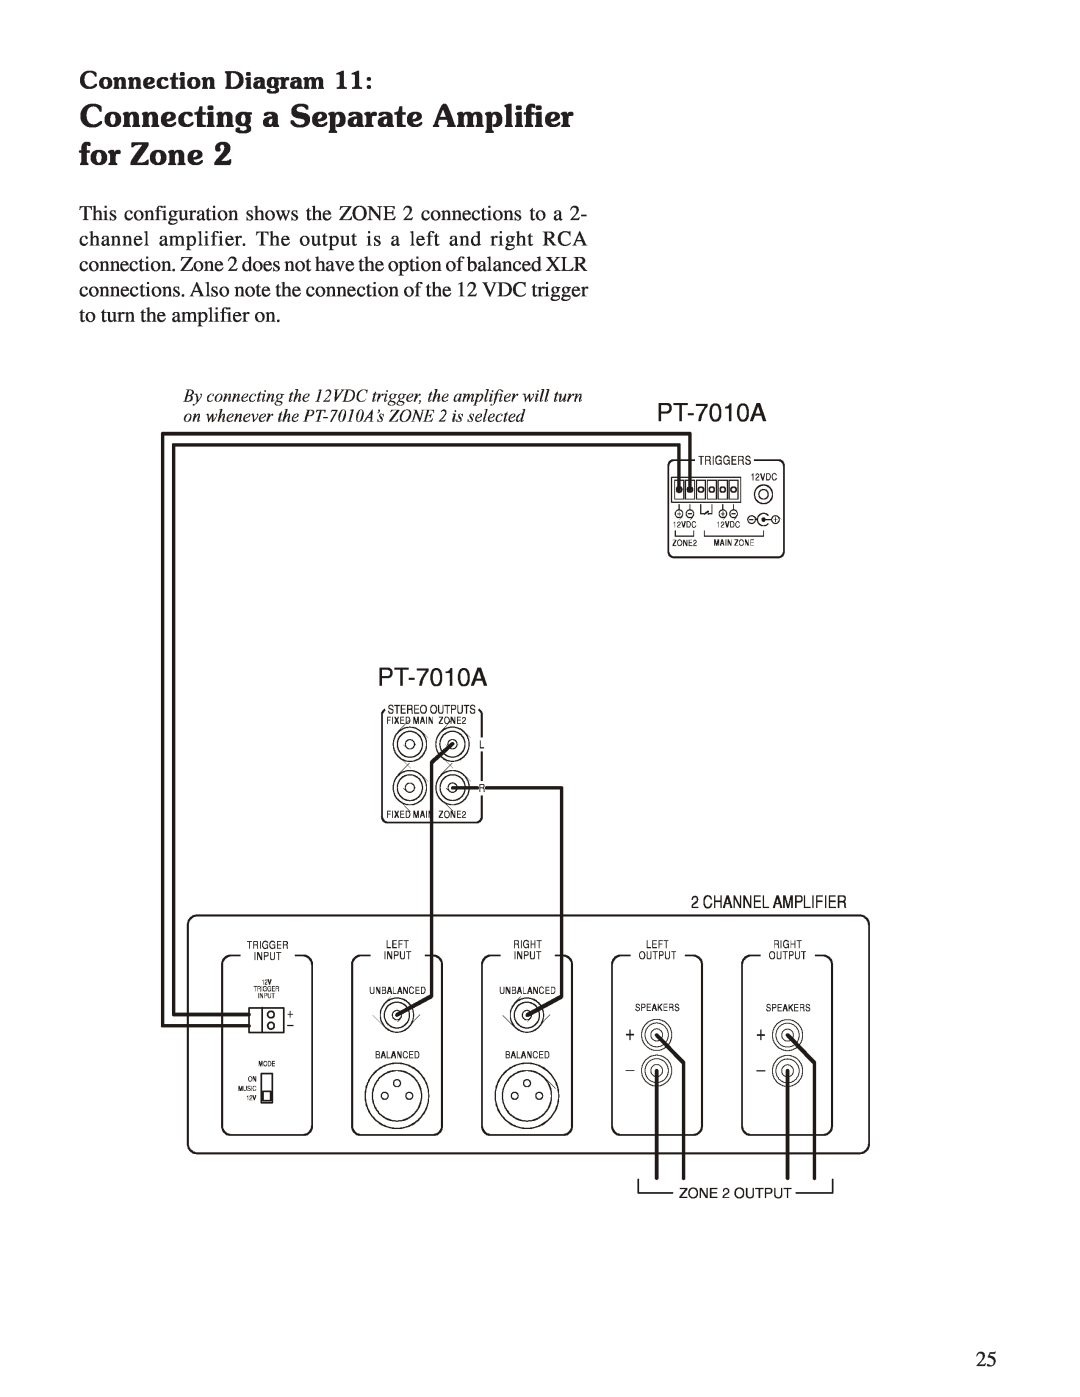 Sherbourn Technologies PT-7010A owner manual Connecting a Separate Amplifier for Zone, Connection Diagram 